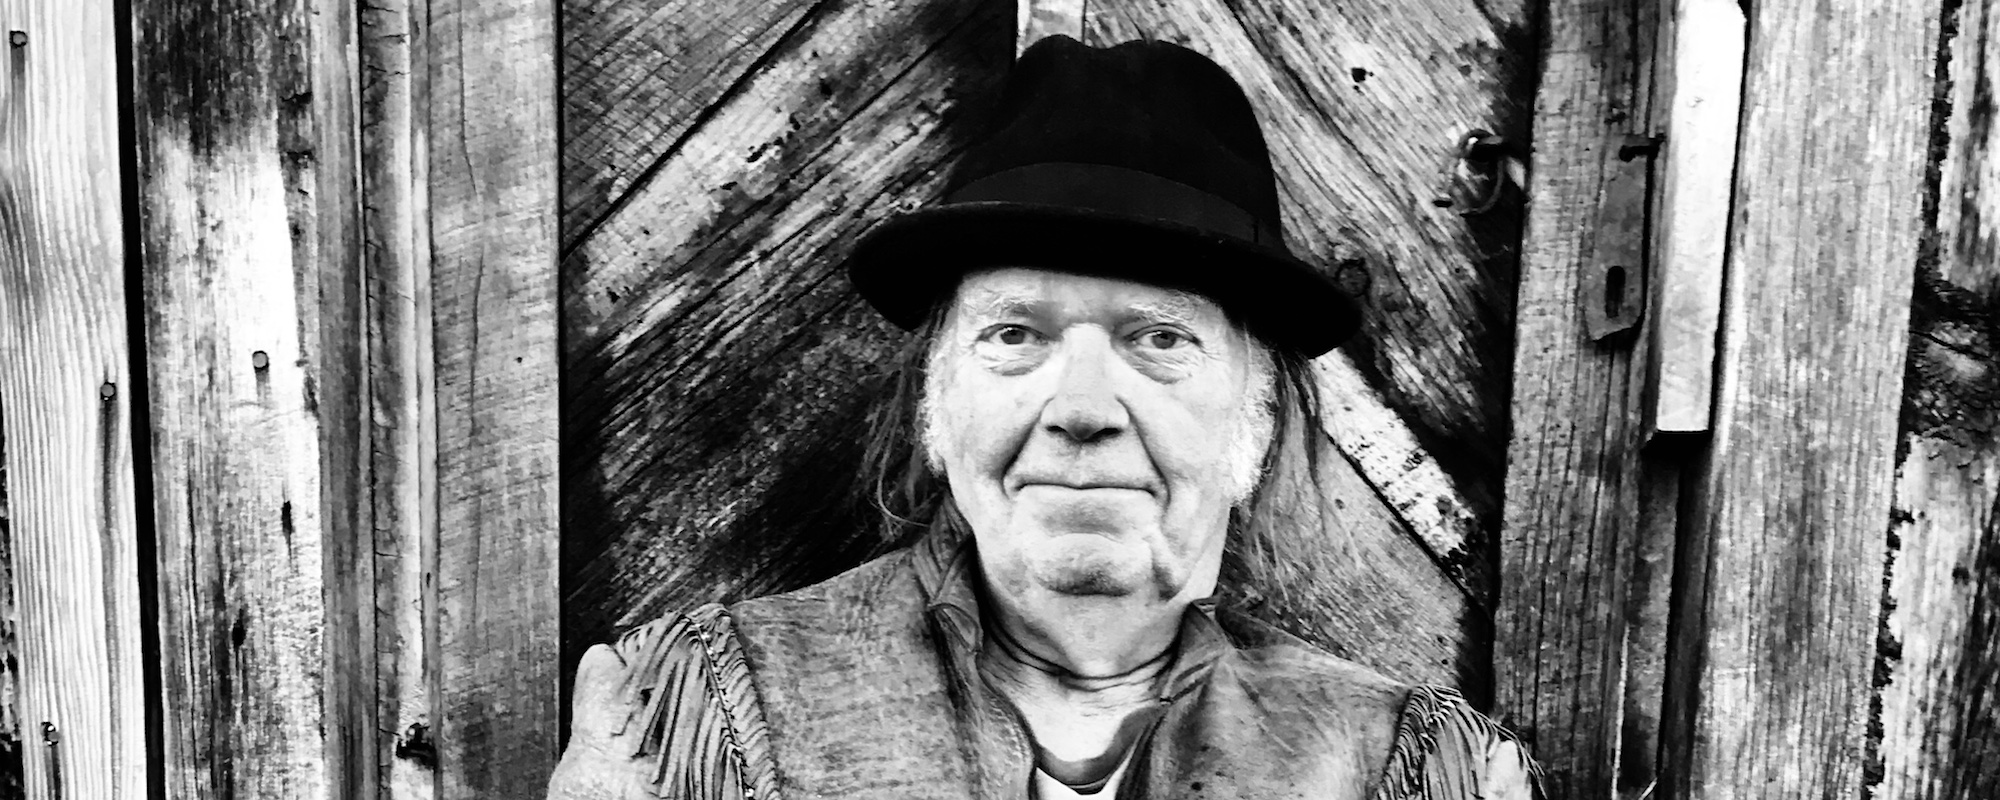 Neil Young Says He’s Working on Multiple Albums: “I Got a Lot of Stuff to Clean Up”